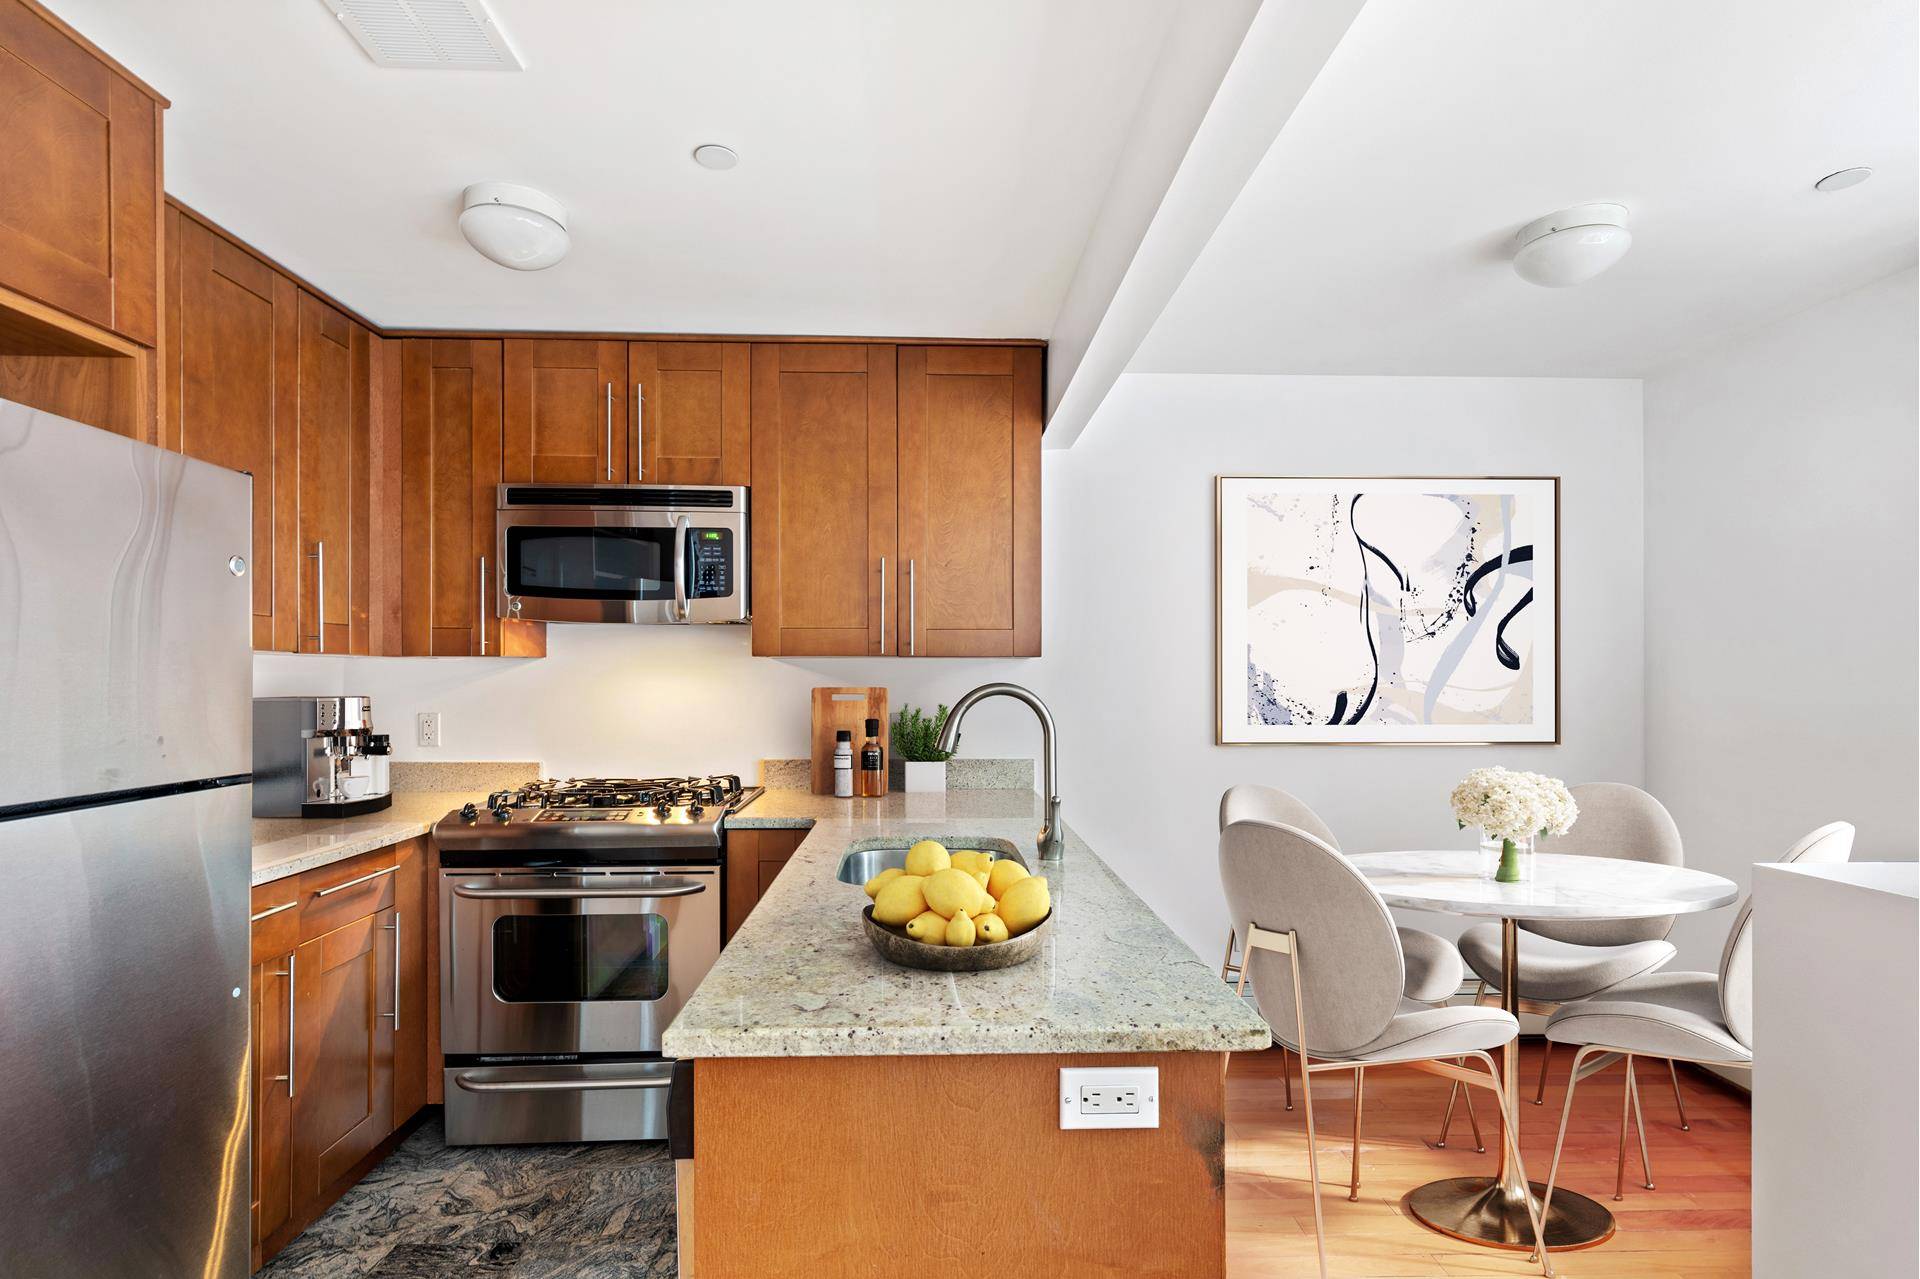 This sunny condo is located right off of Seventh Avenue in Park Slope.